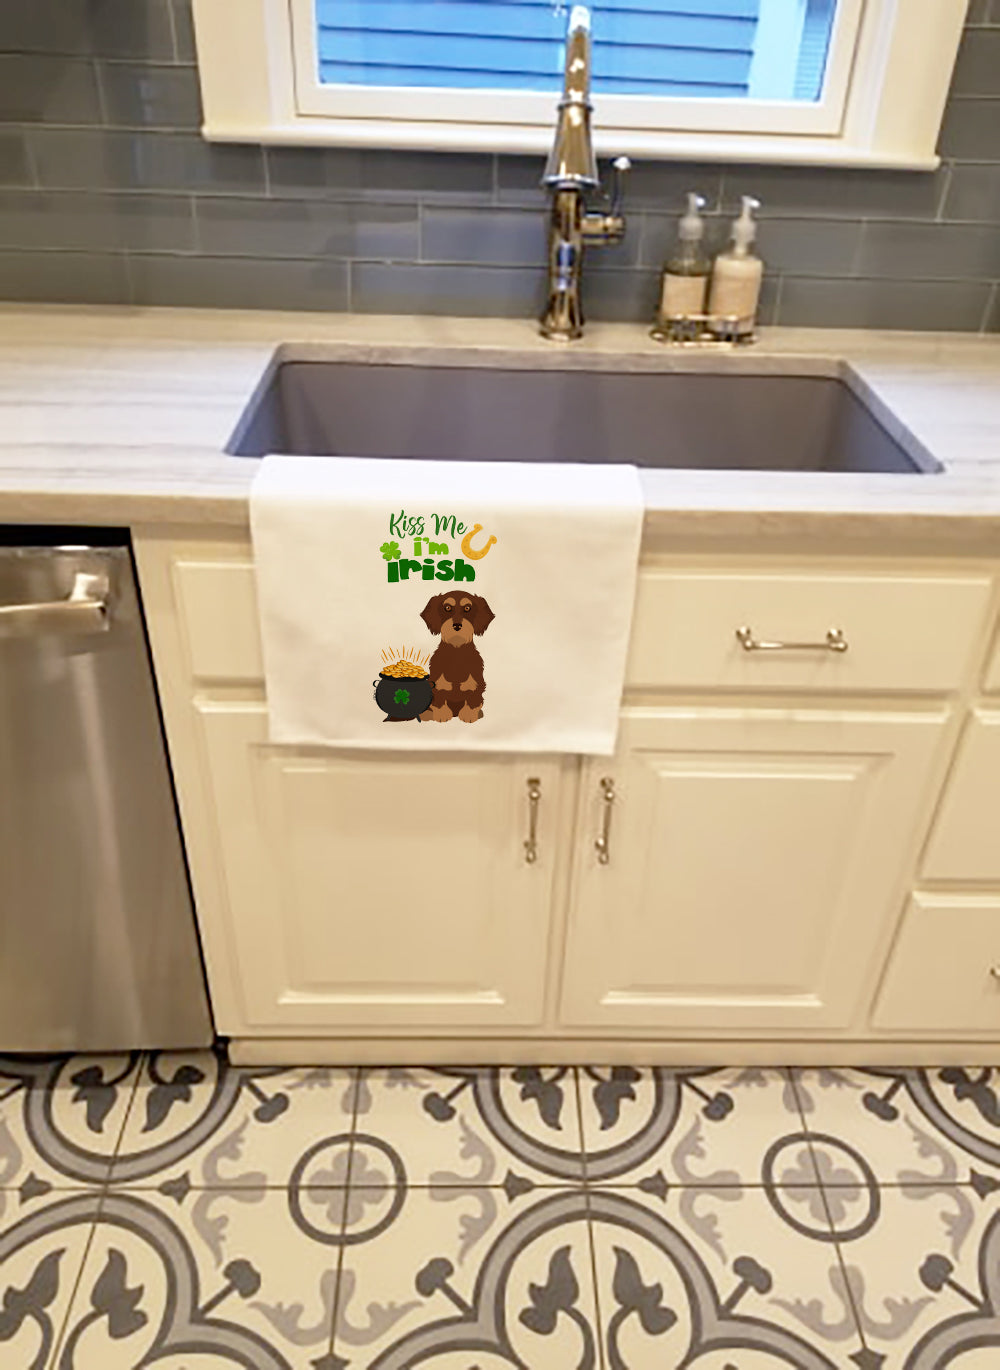 Buy this Wirehair Red and Tan Dachshund St. Patrick's Day White Kitchen Towel Set of 2 Dish Towels